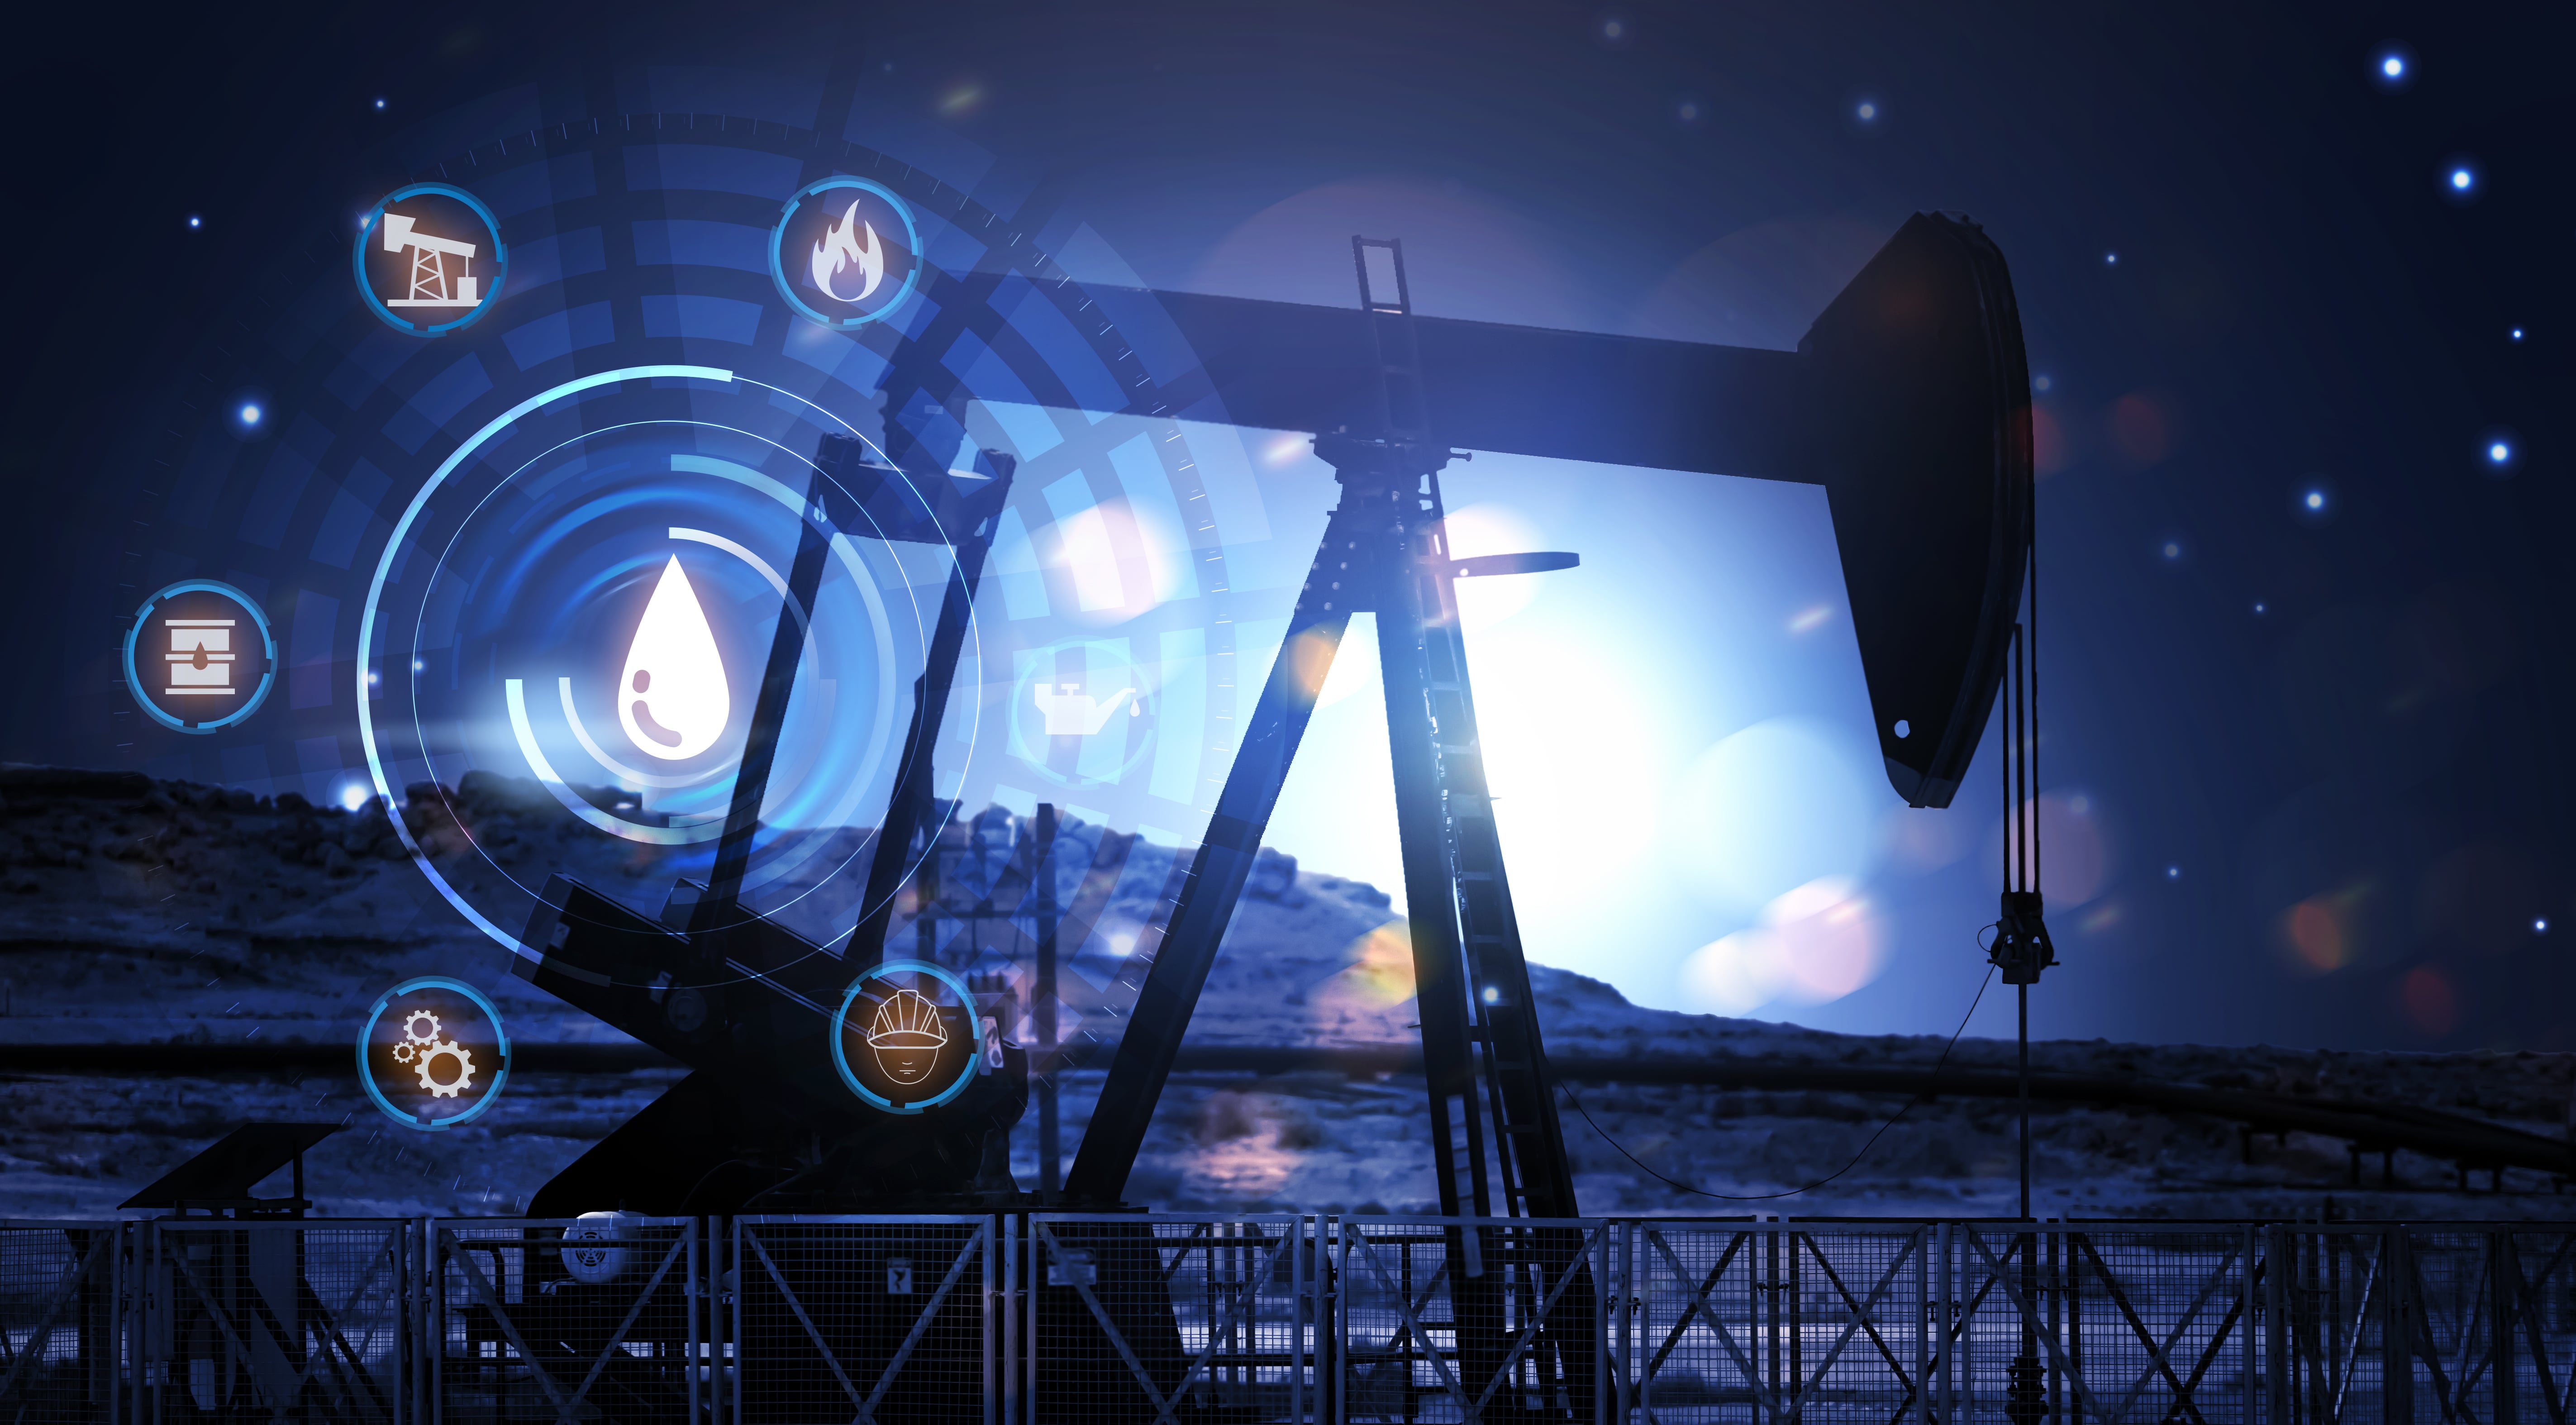 Concerns about economic growth persist as crude oil prices decline